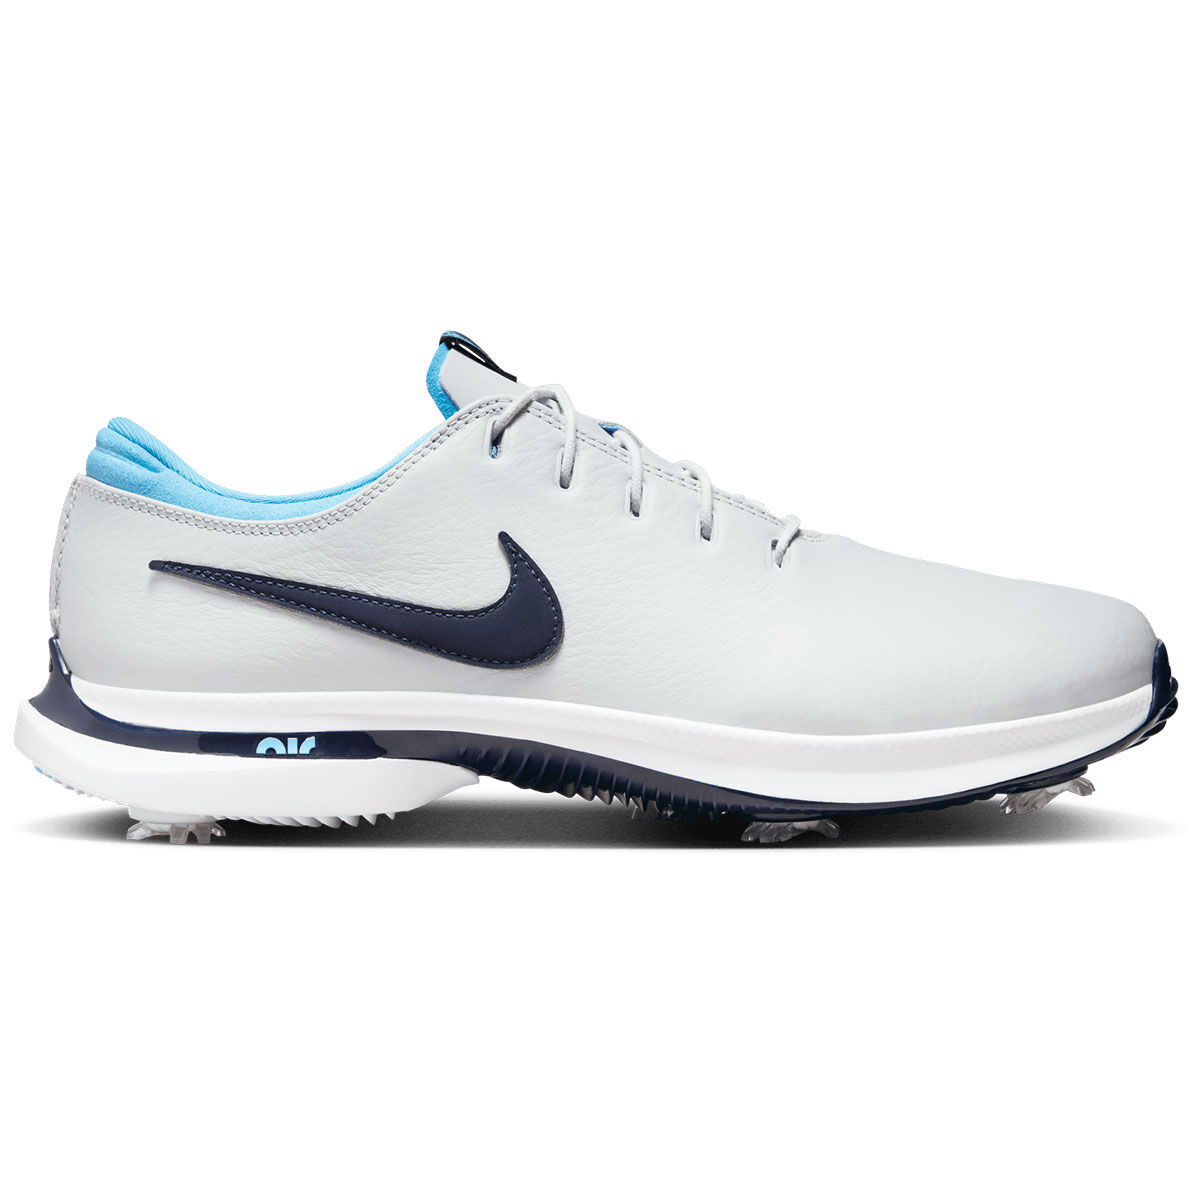 Nike Air Zoom Victory Tour 3 Waterproof Spiked Golf Shoes, Mens, Pure platinum/obsidian/white, 10 | American Golf